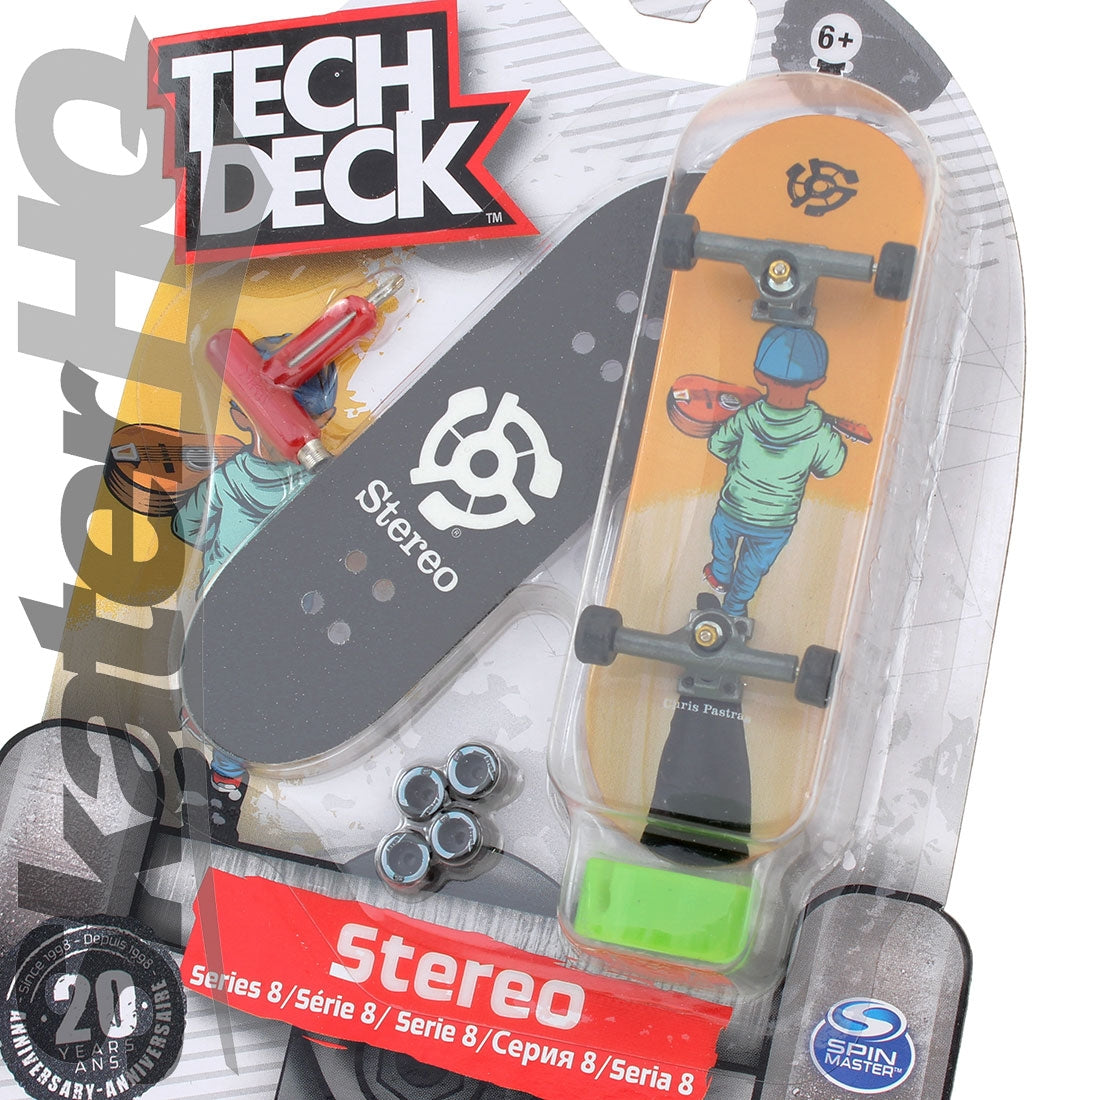 Tech Deck Series 8 - Stereo - Pastras